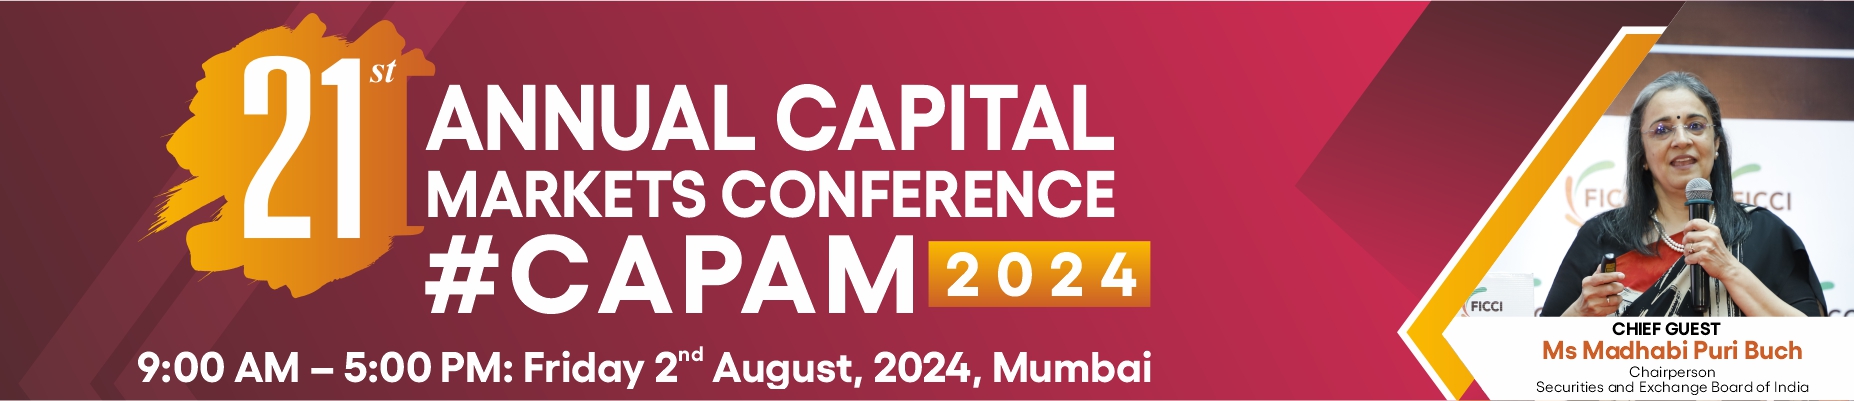 21st Annual Capital Markets Conference - #CAPAM 2024